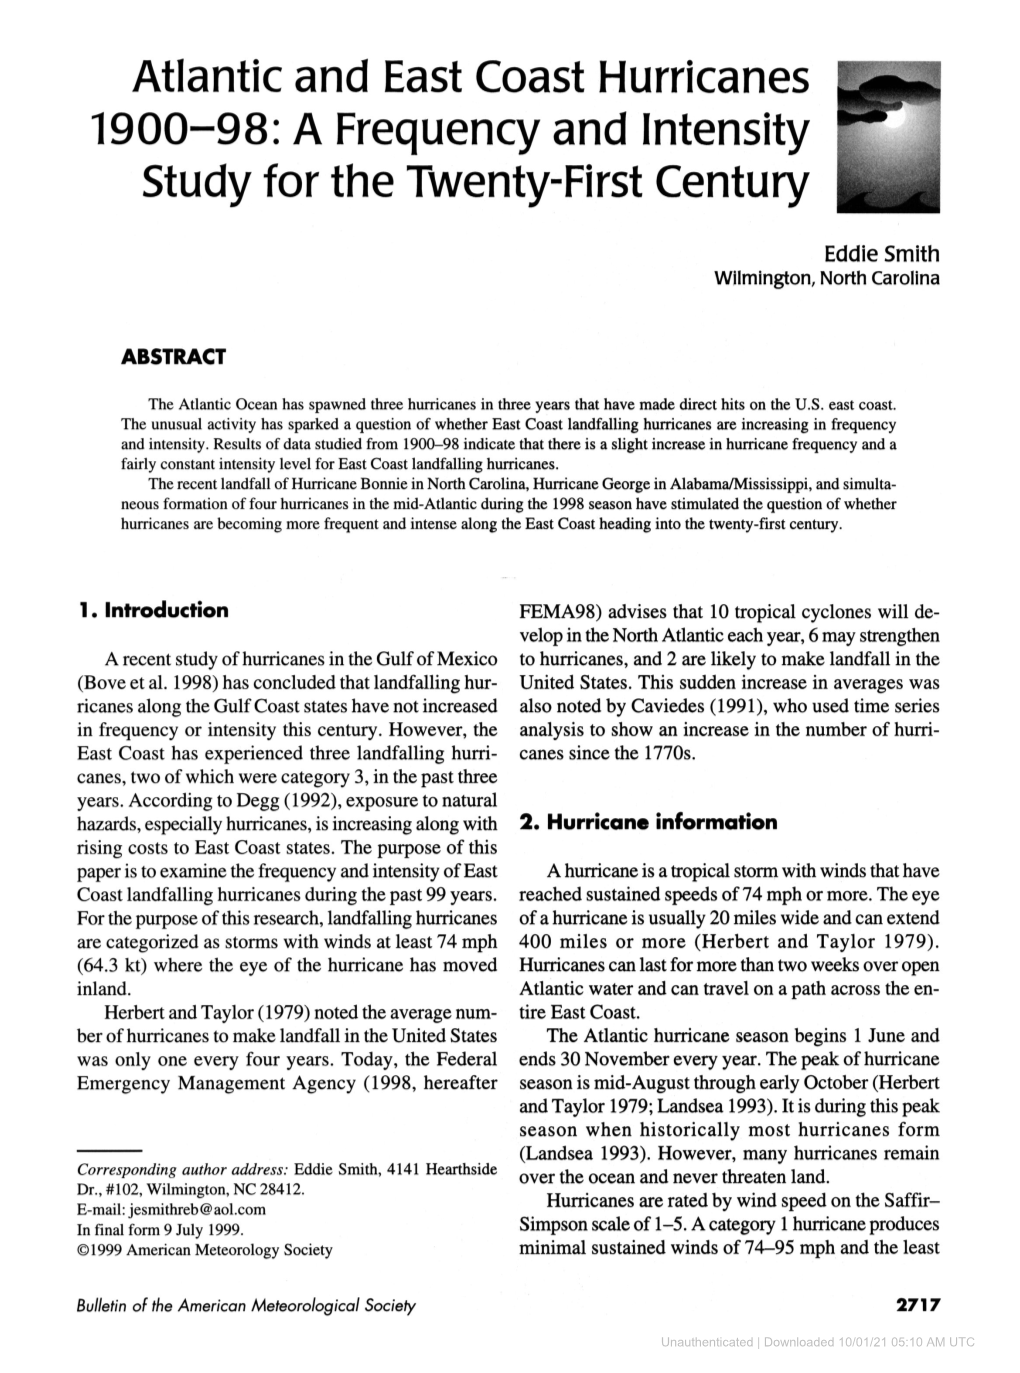 Atlantic and East Coast Hurricanes 1900-98: a Frequency and Intensity Study for the Twenty-First Century